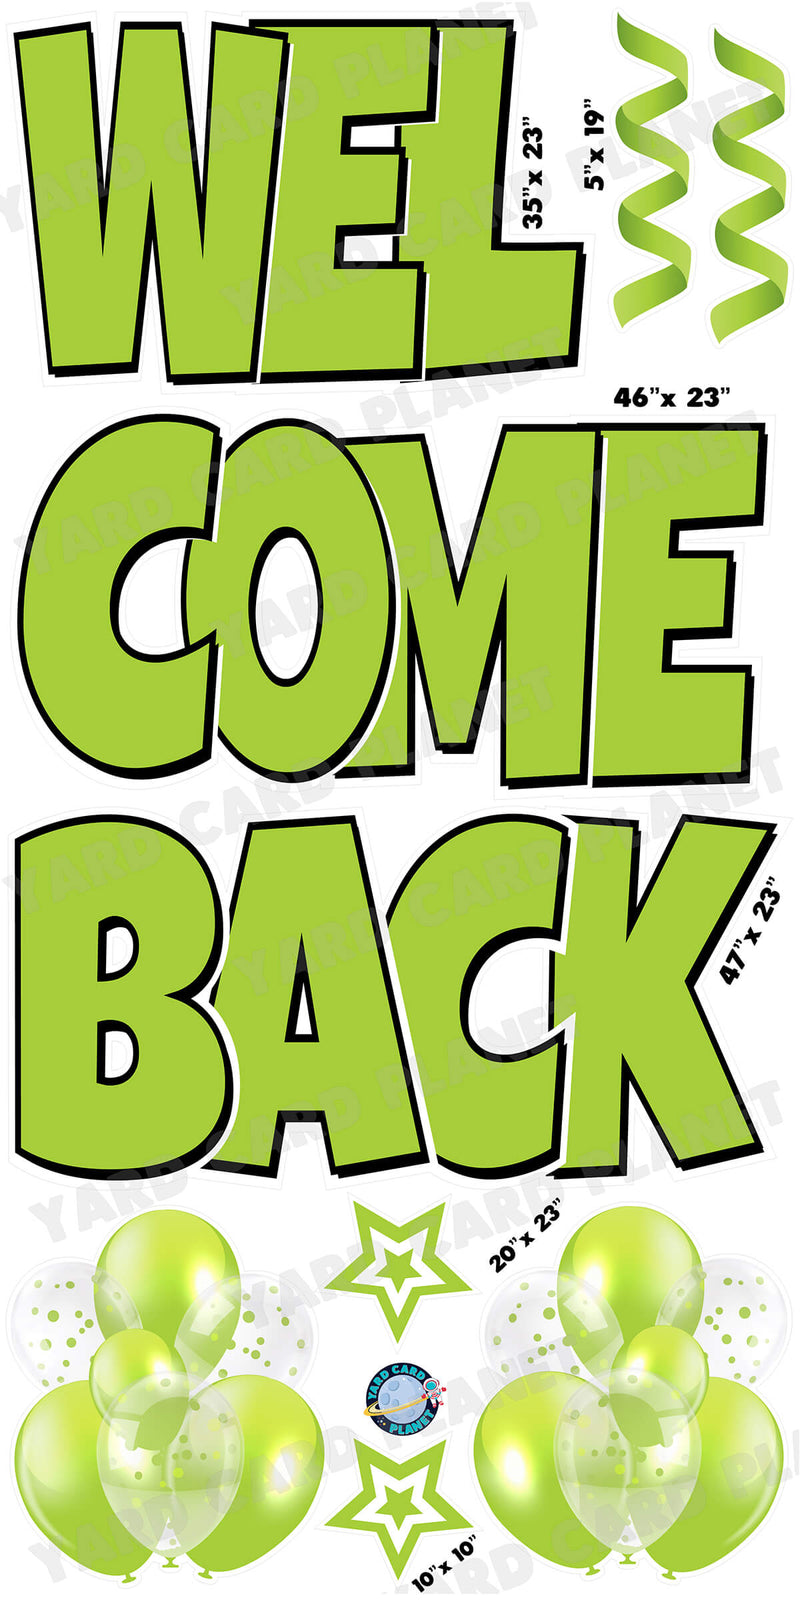 Large 23" Welcome Back Yard Card EZ Quick Sets in Luckiest Guy Font and Flair in Solid Colors (Available in Multiple Colors)